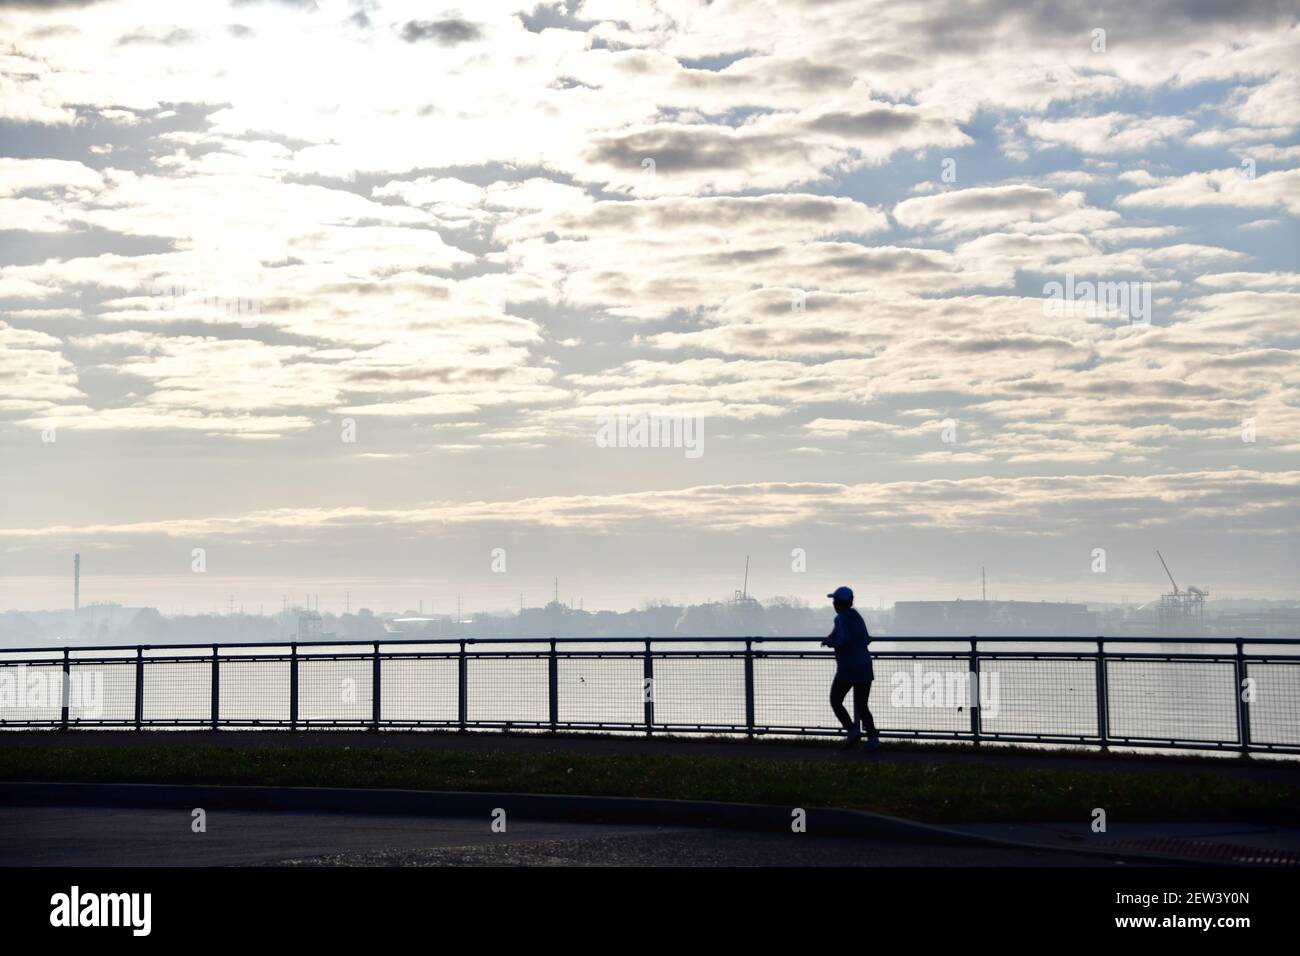 A lone runner sihouetted against the sky along the river. Stock Photo